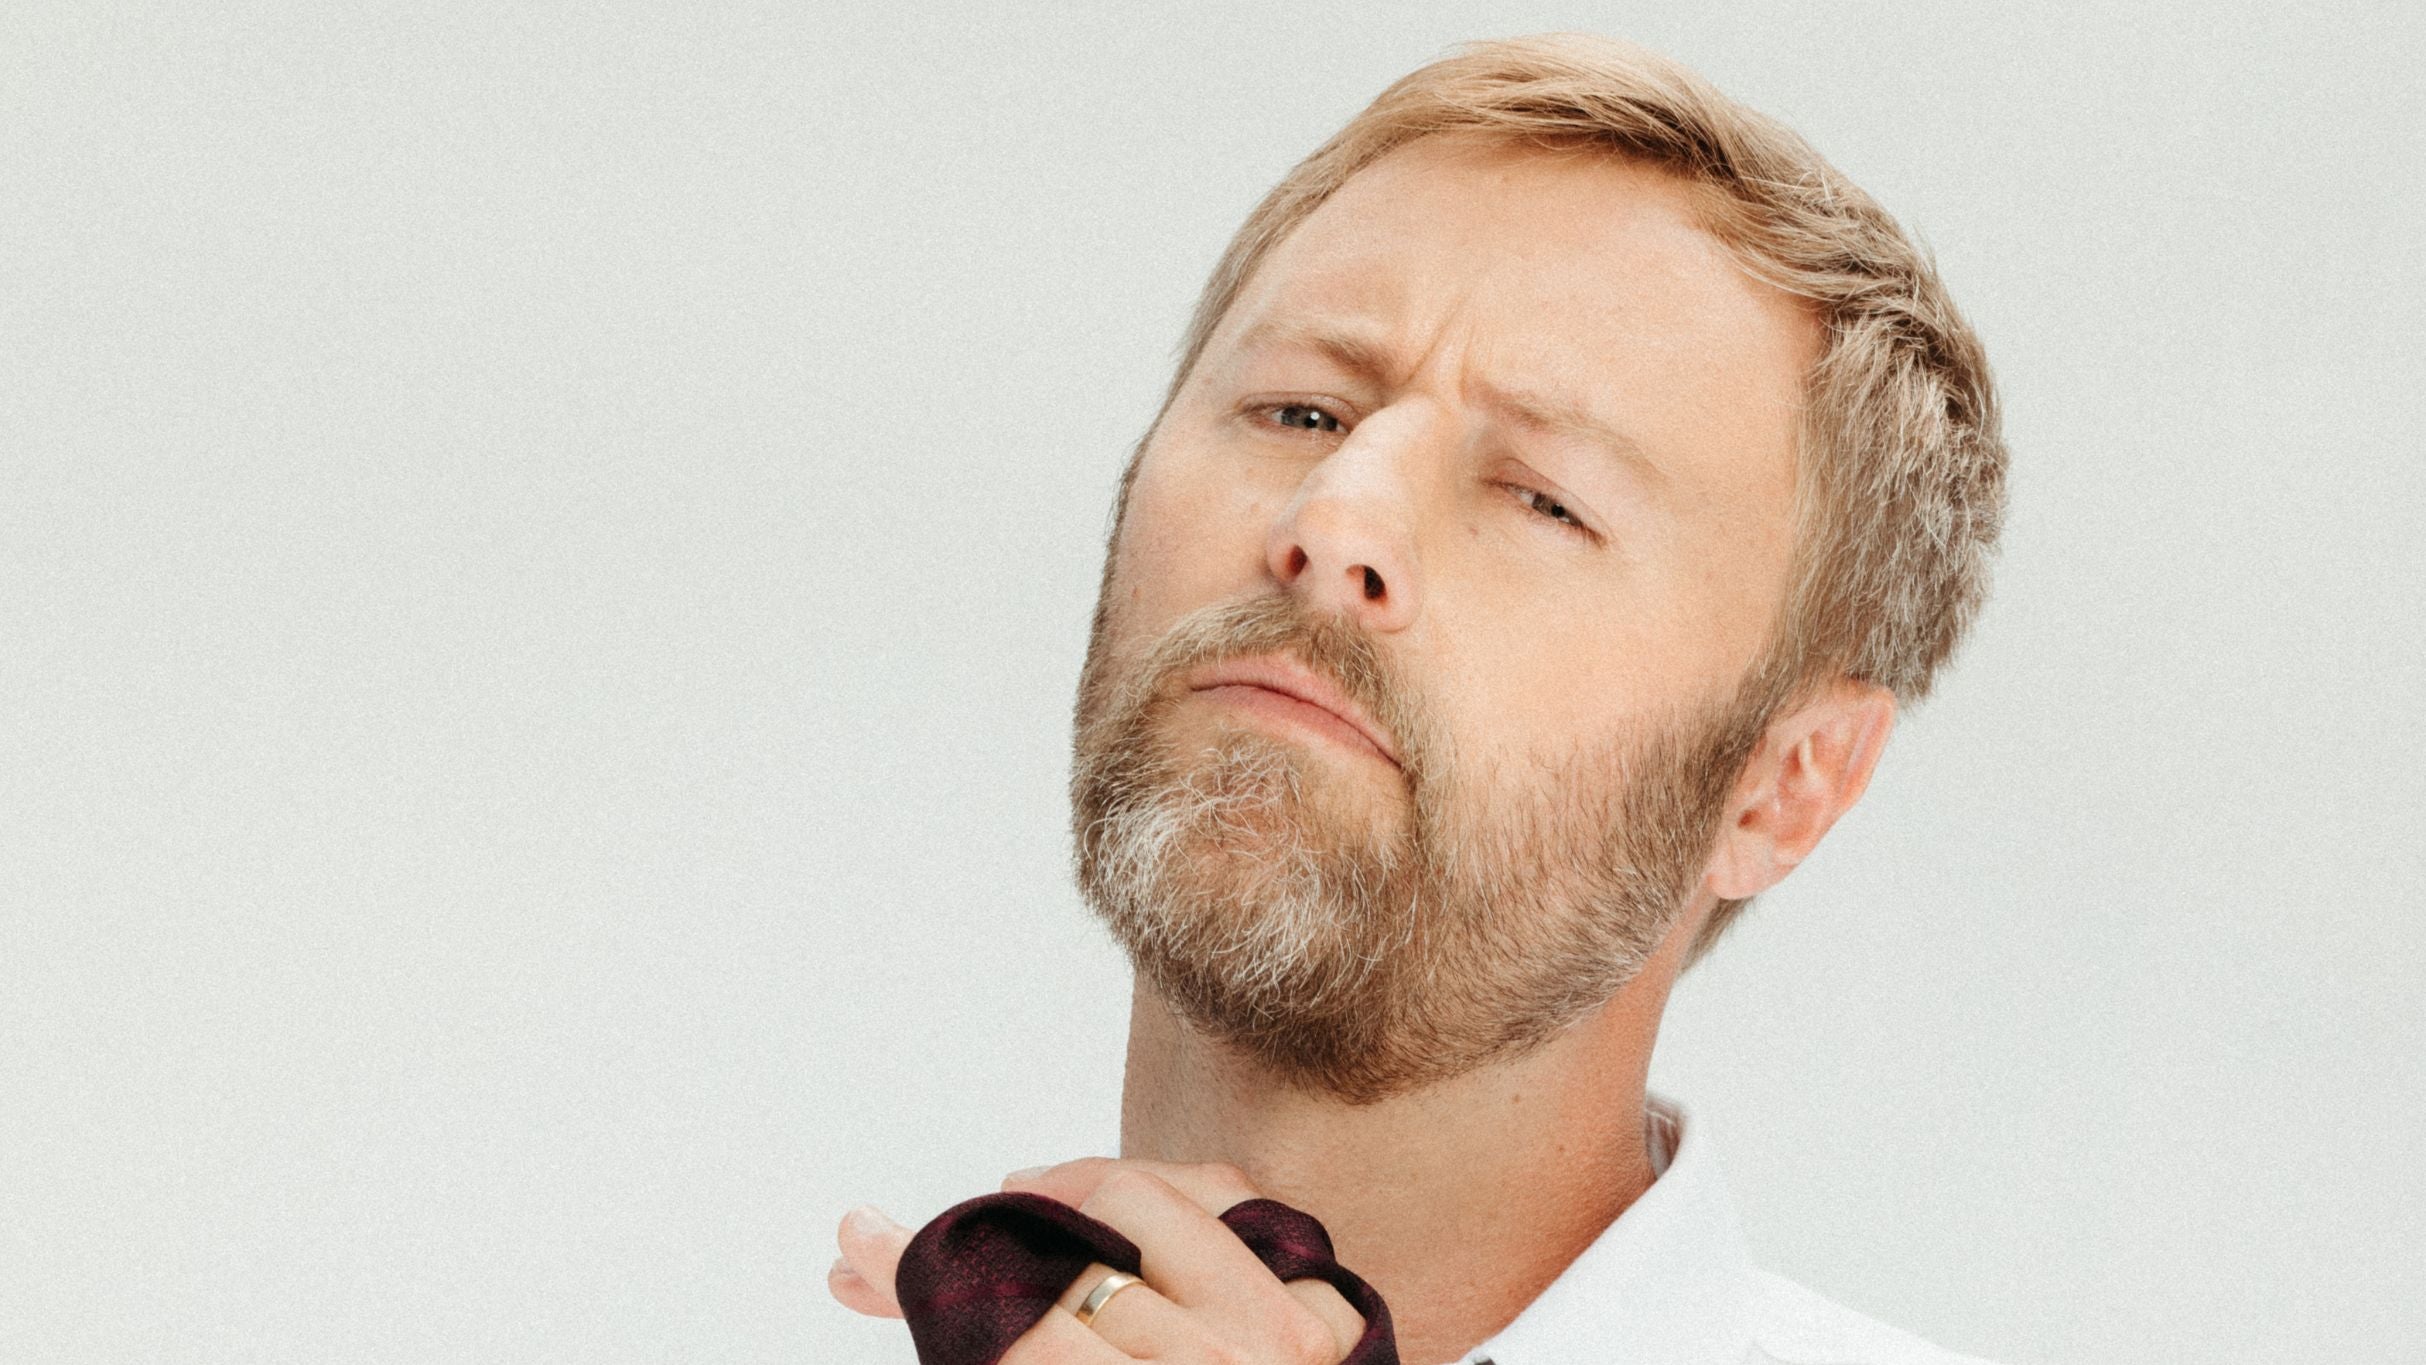 *SOLD OUT* Rory Scovel - 7 PM SHOW at Thalia Hall